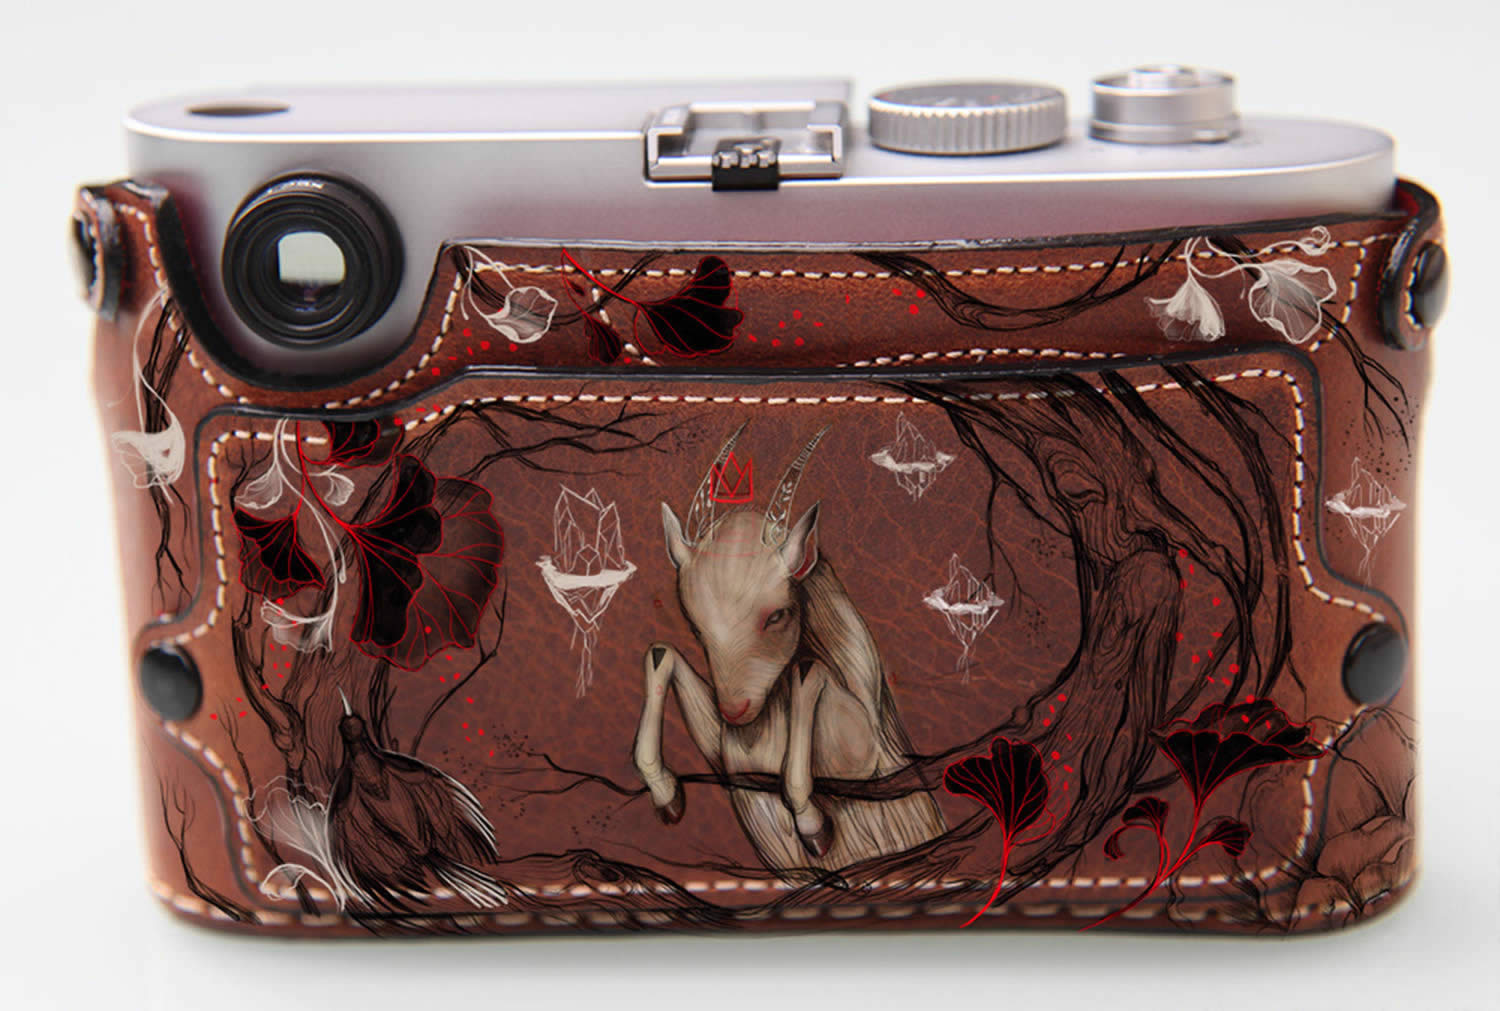 painted leather camera